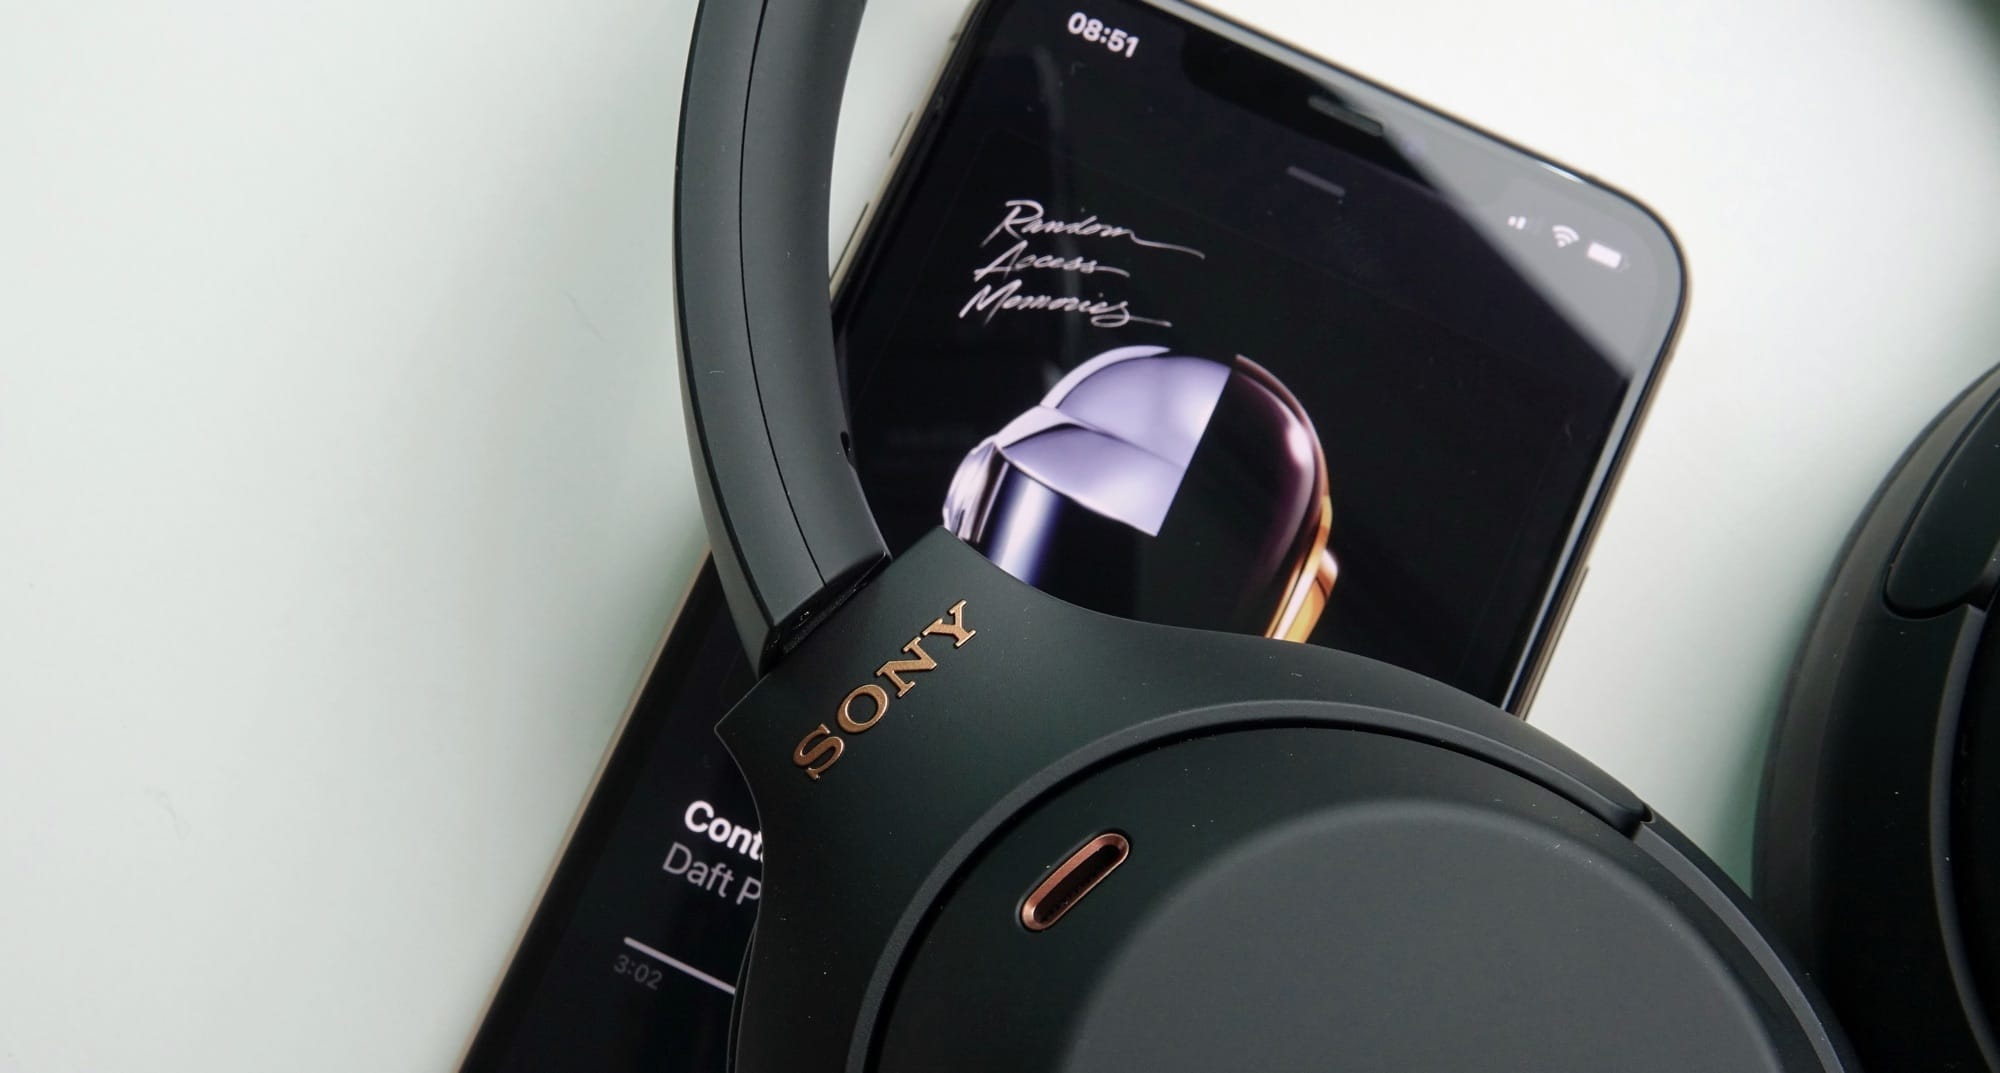 Sony WH-1000XM4 reviewed